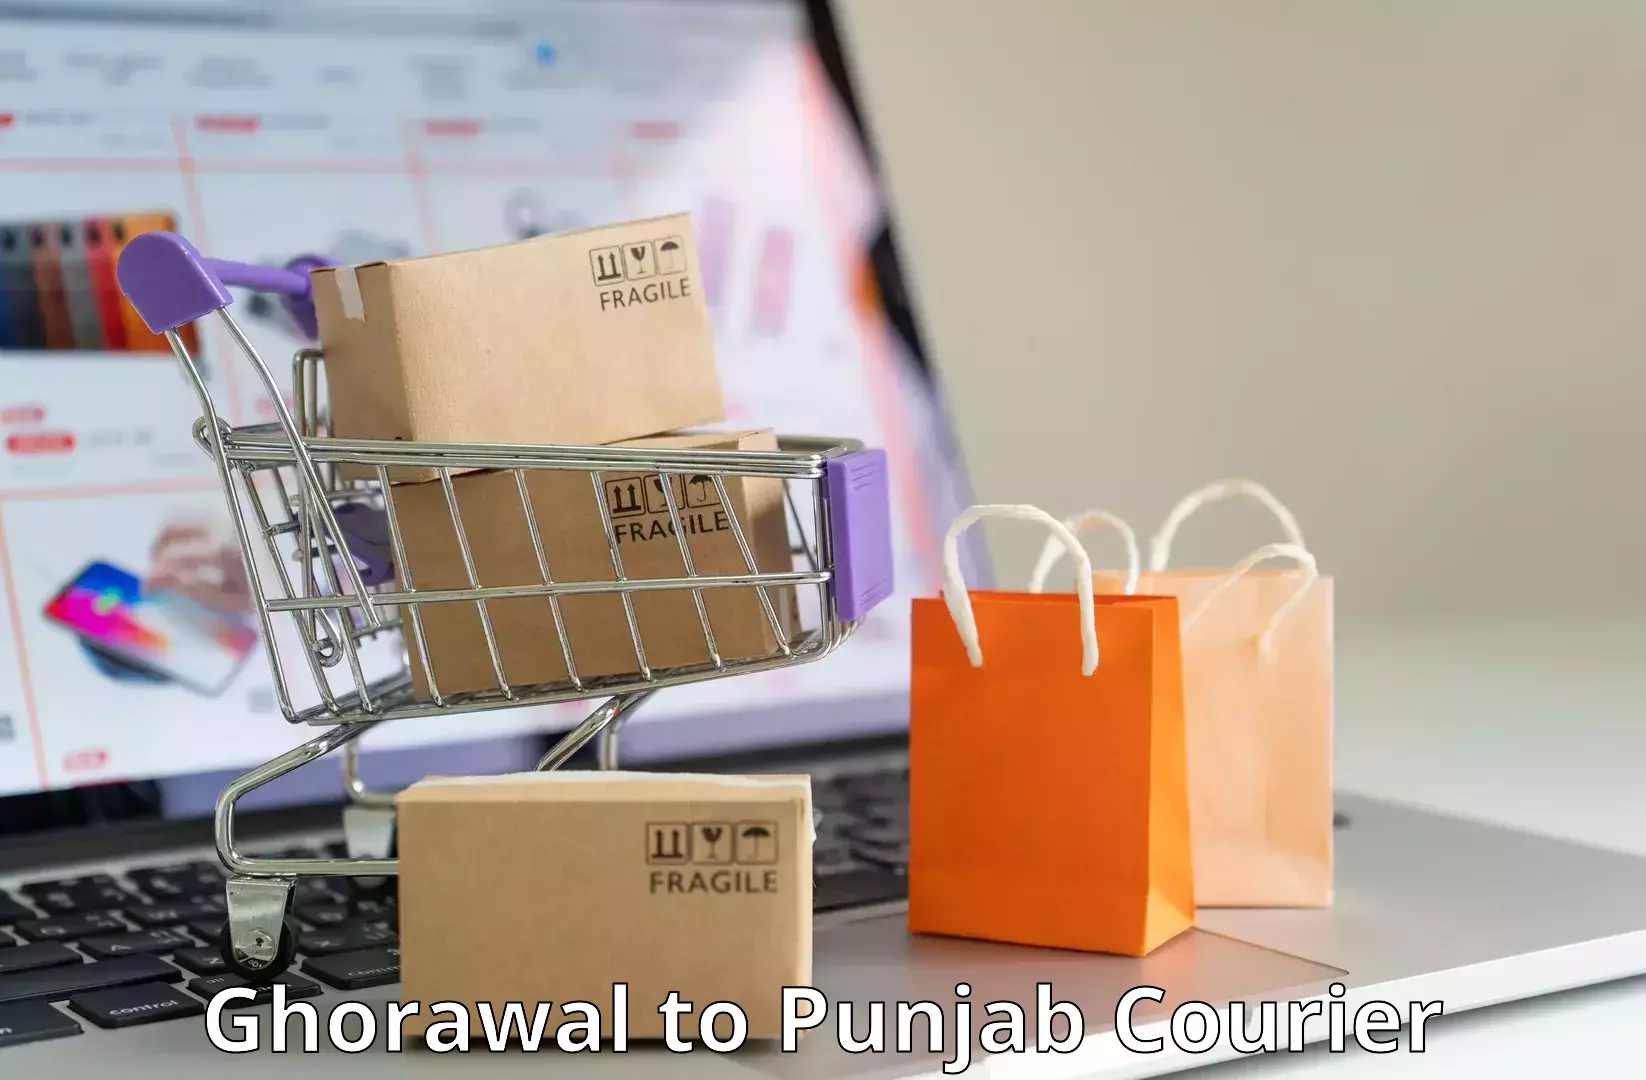 Sustainable delivery practices Ghorawal to Punjab